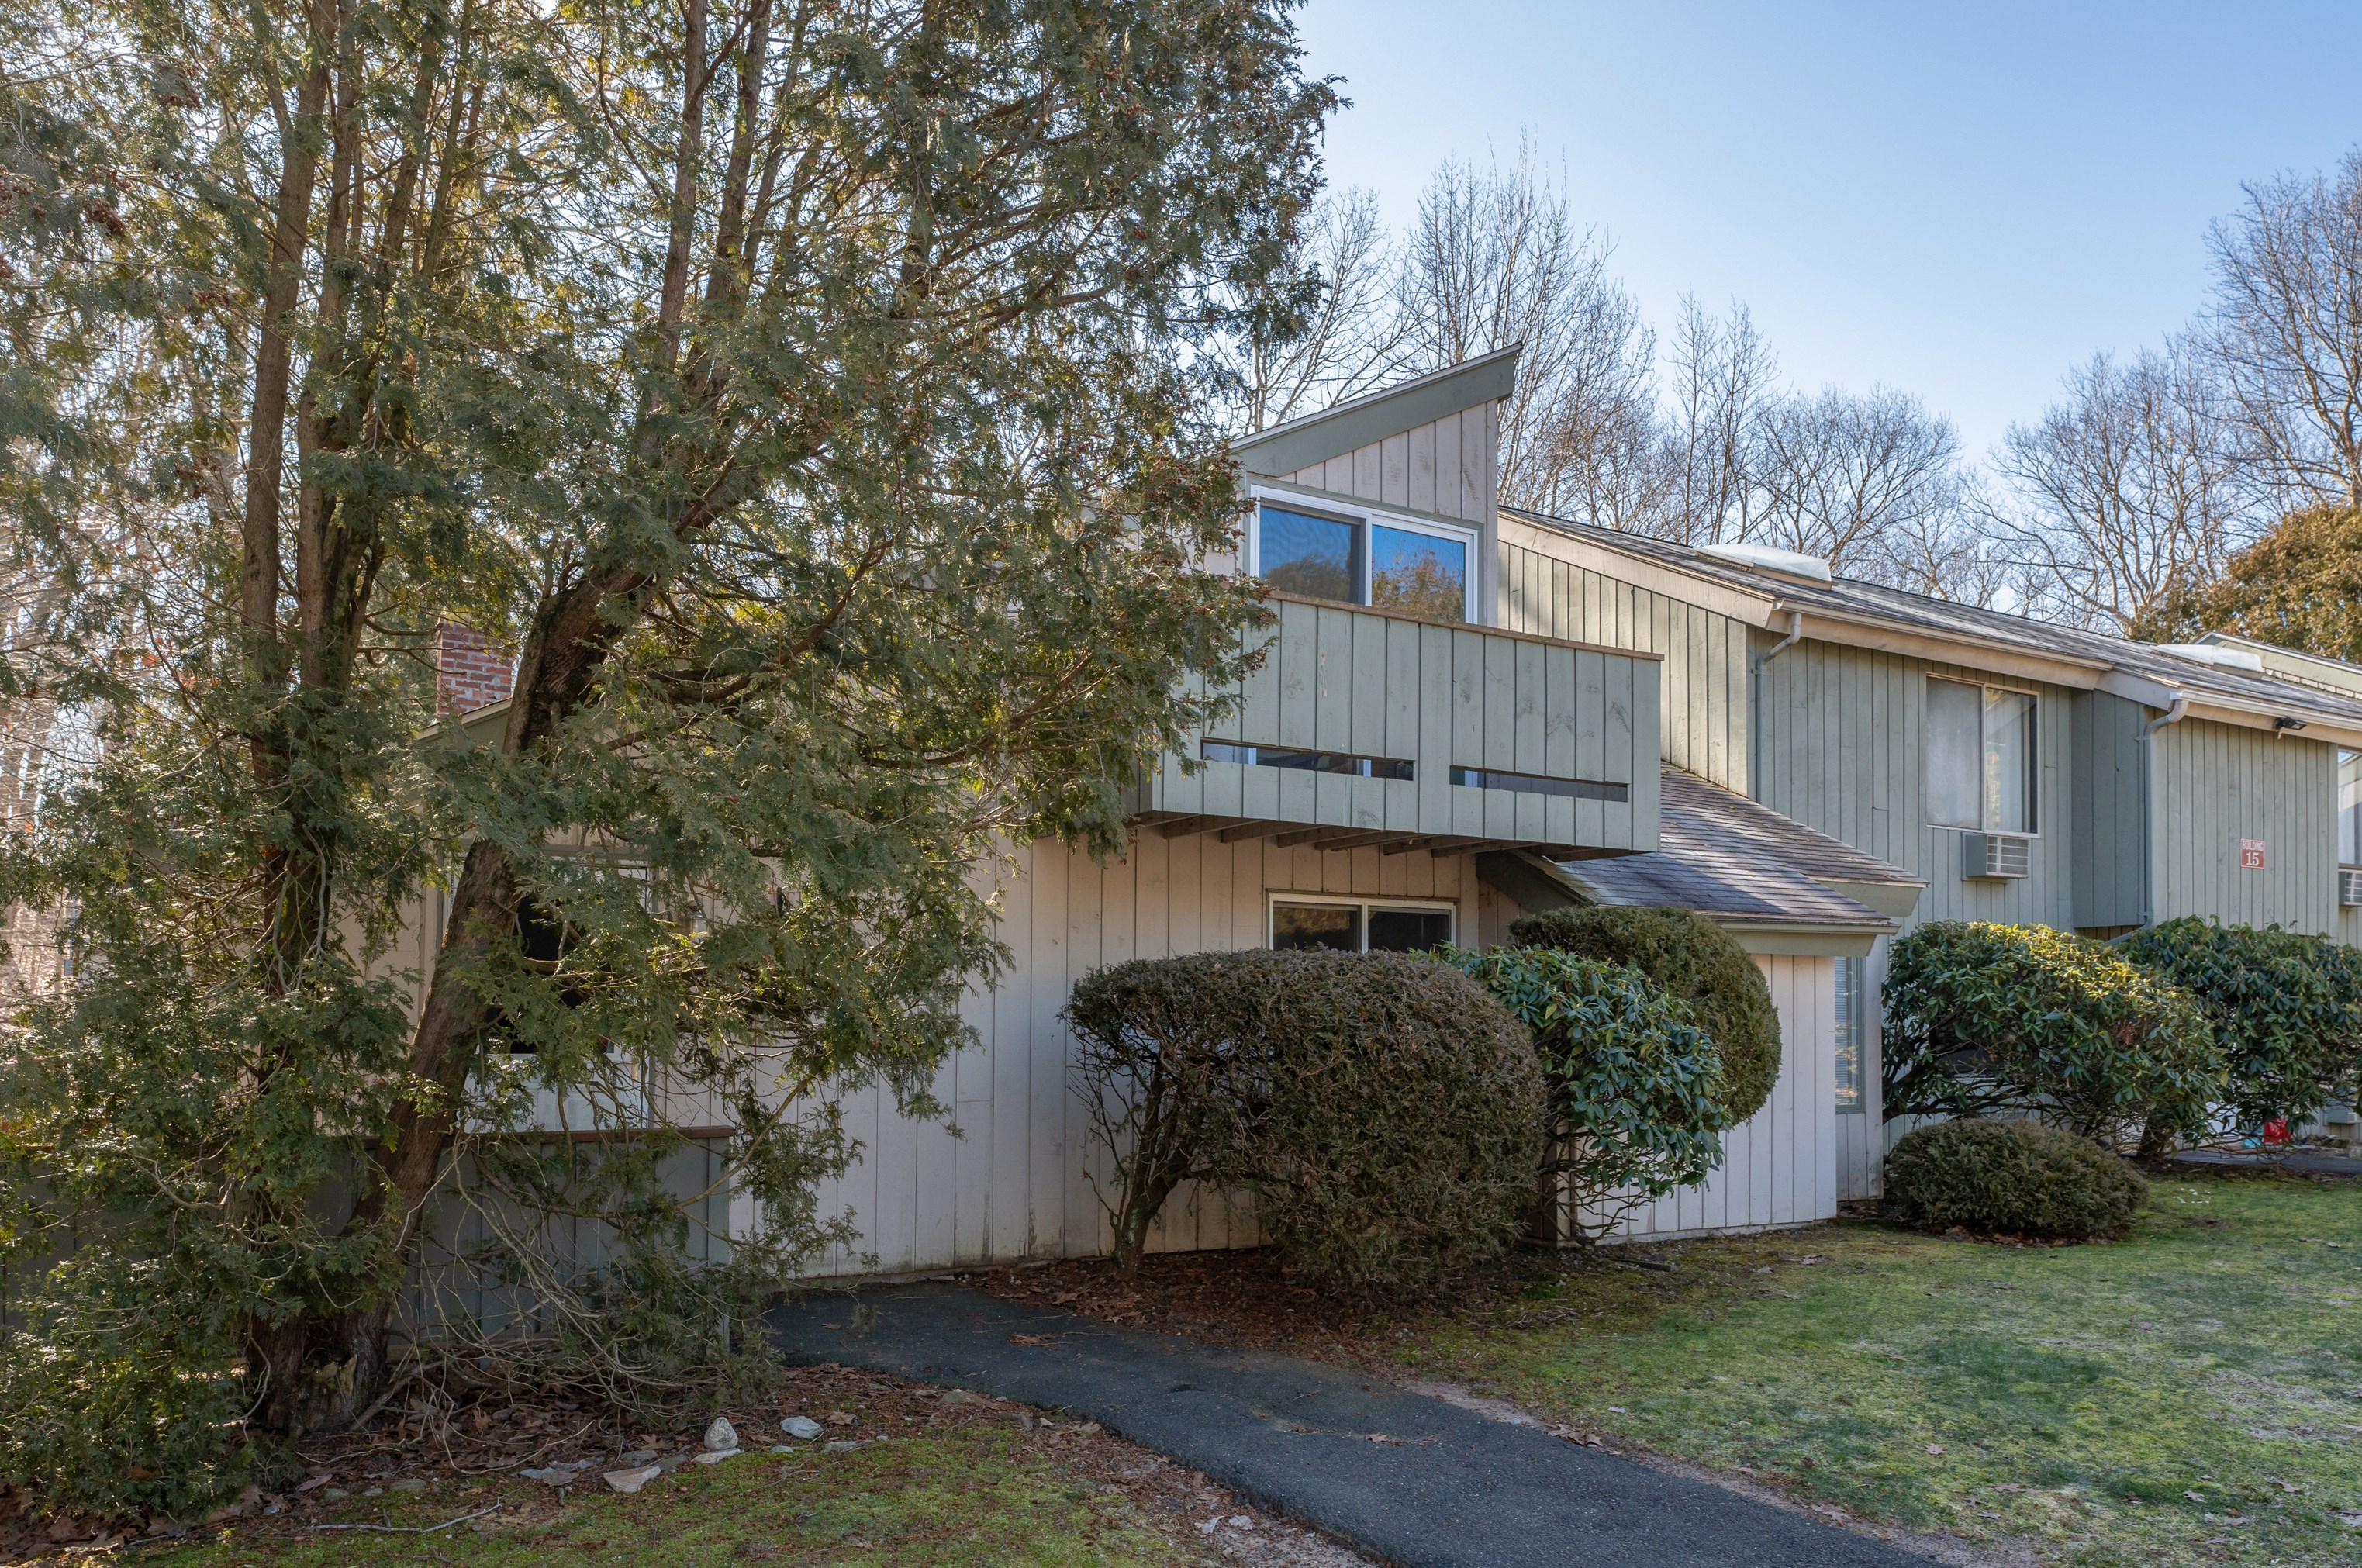 8 Polpis Ln #8, Guilford, CT 06437